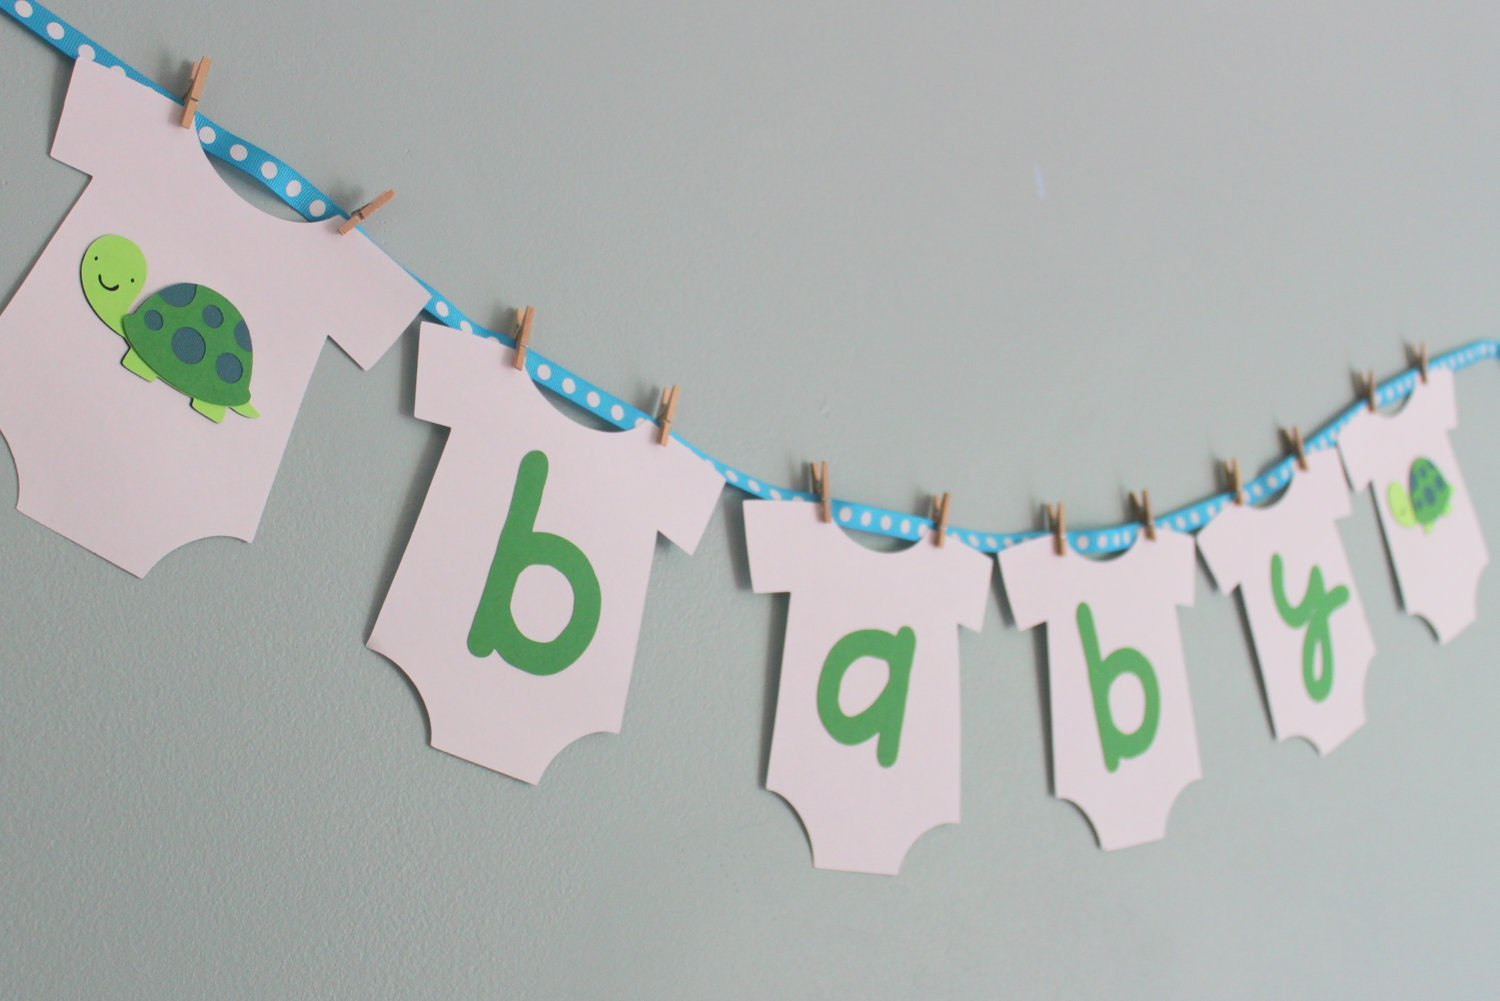 Baby Shower Banner Template Ideas Formidable Safari Flag throughout Baby Shower Banner Template